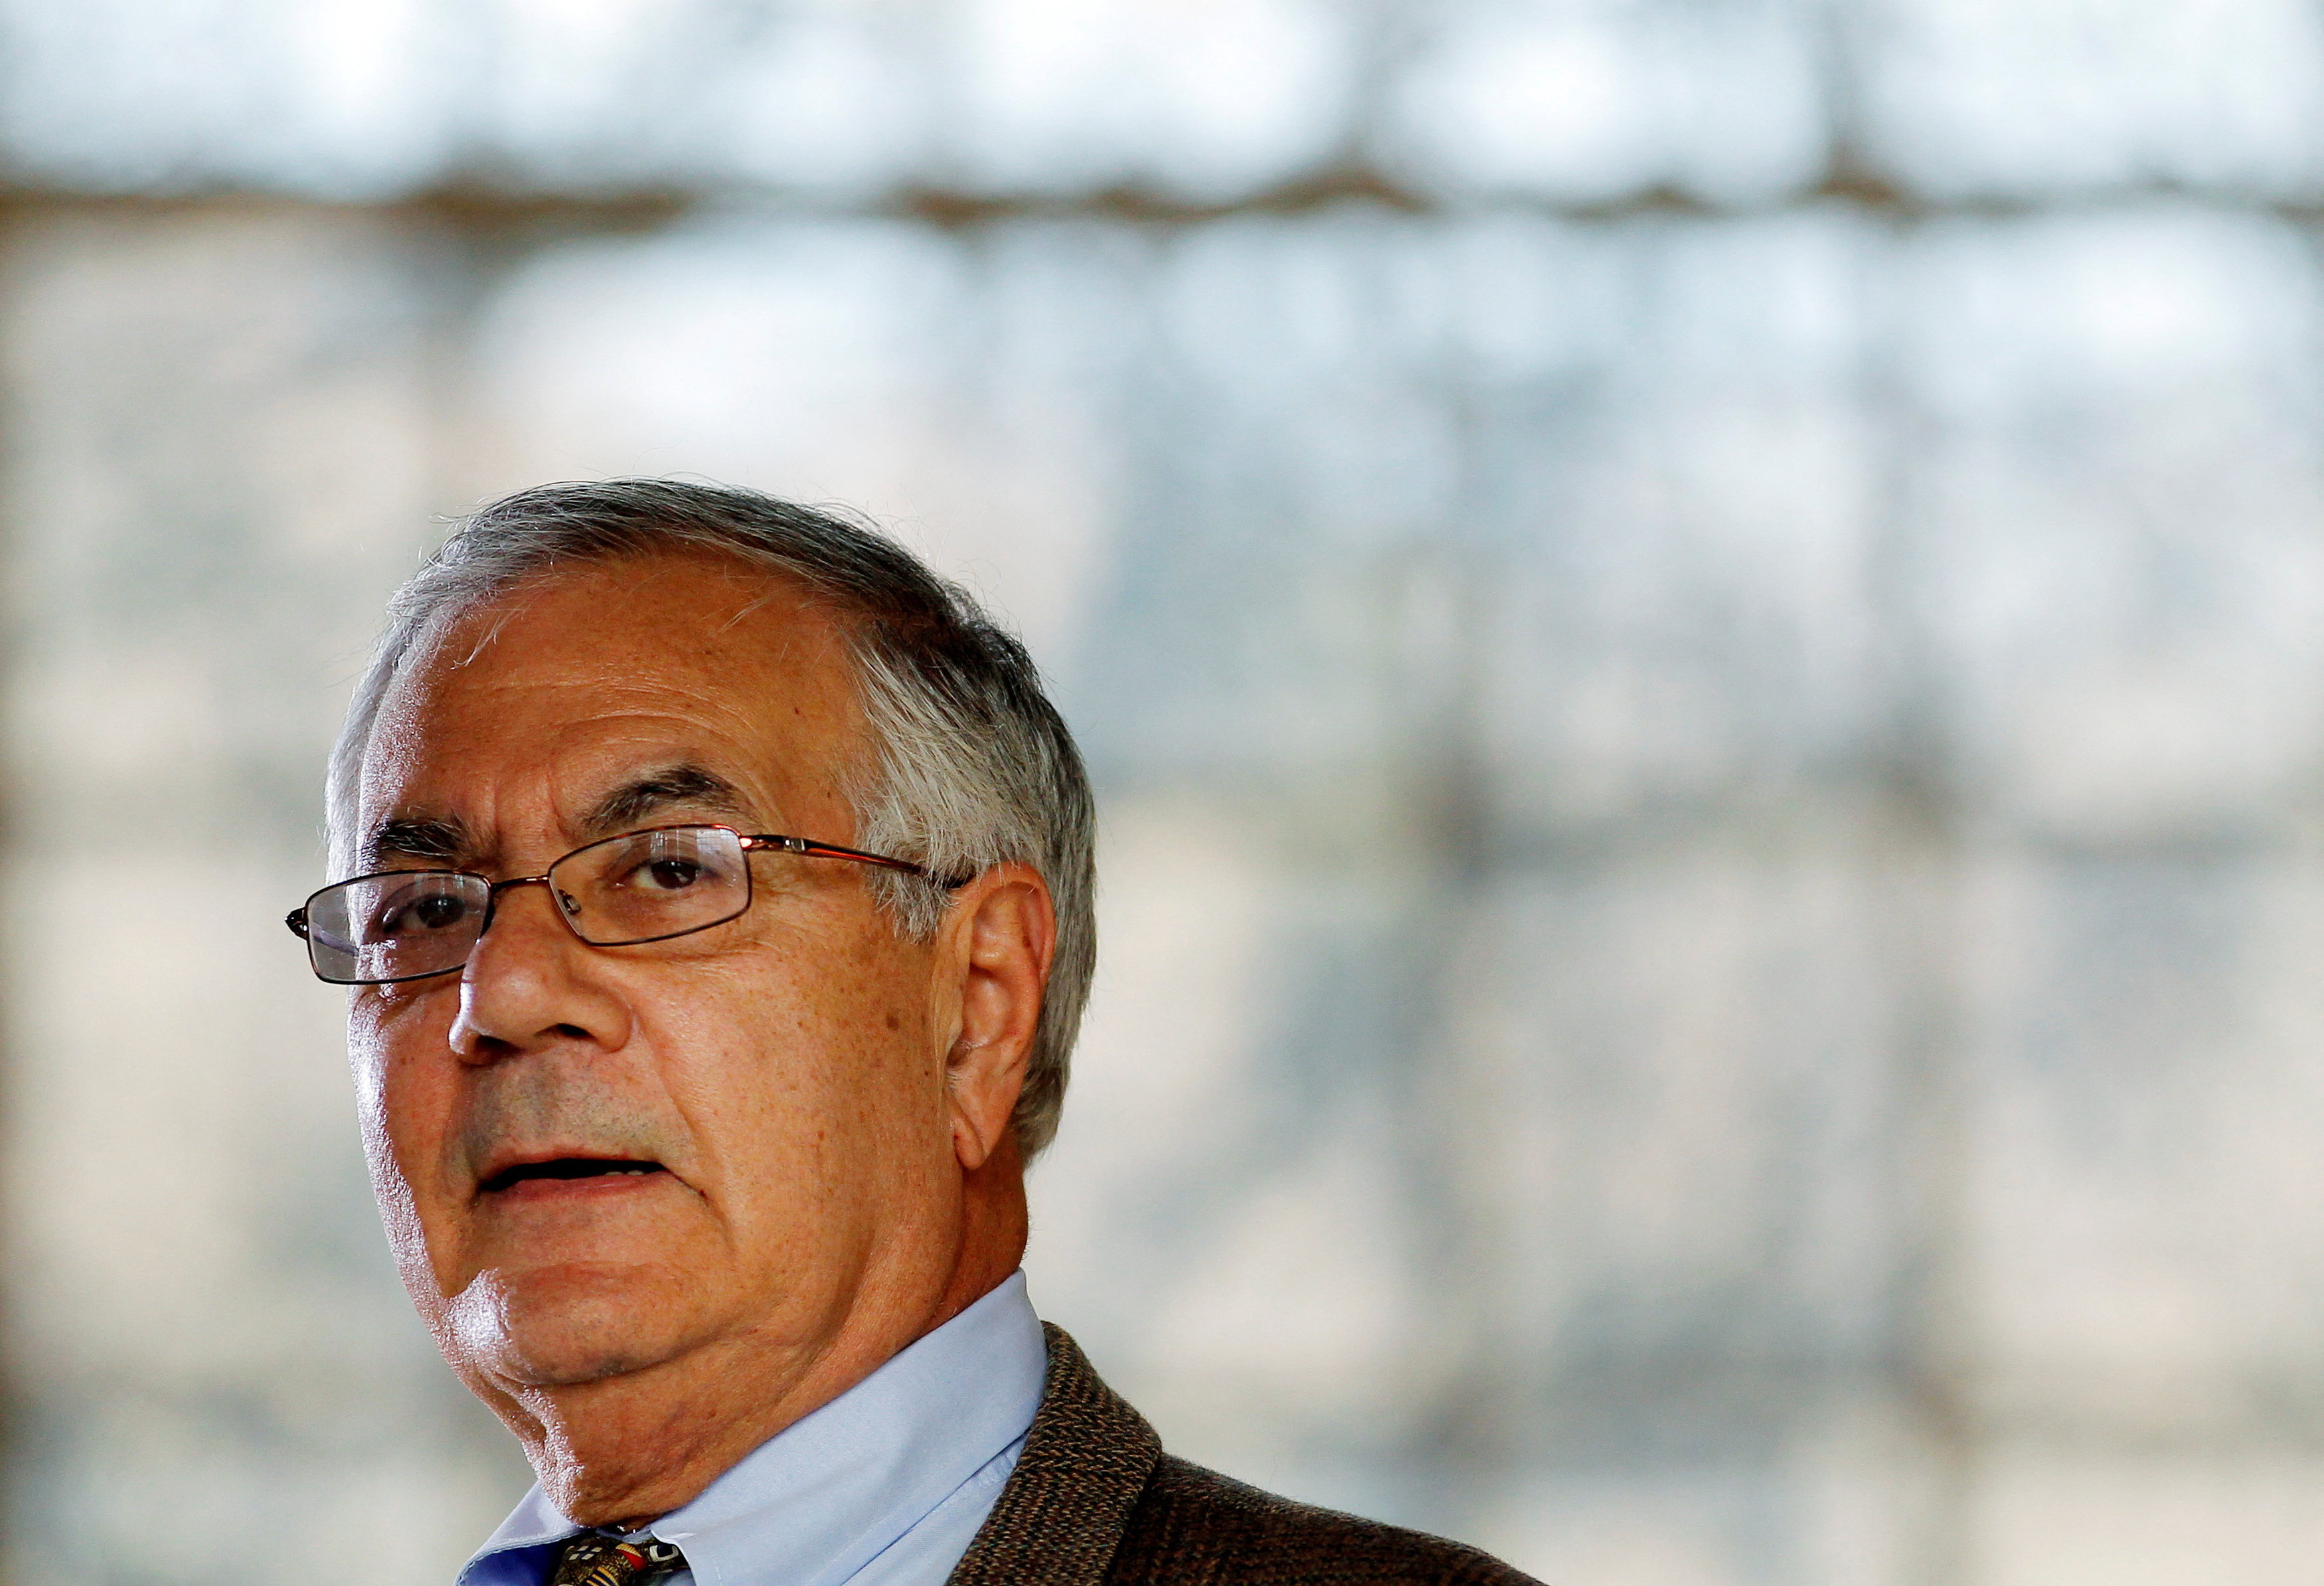 Rep. Barney Frank (D-MA) speaks at a news conference announcing that he would not seek a 17th term in congress next year in Newton